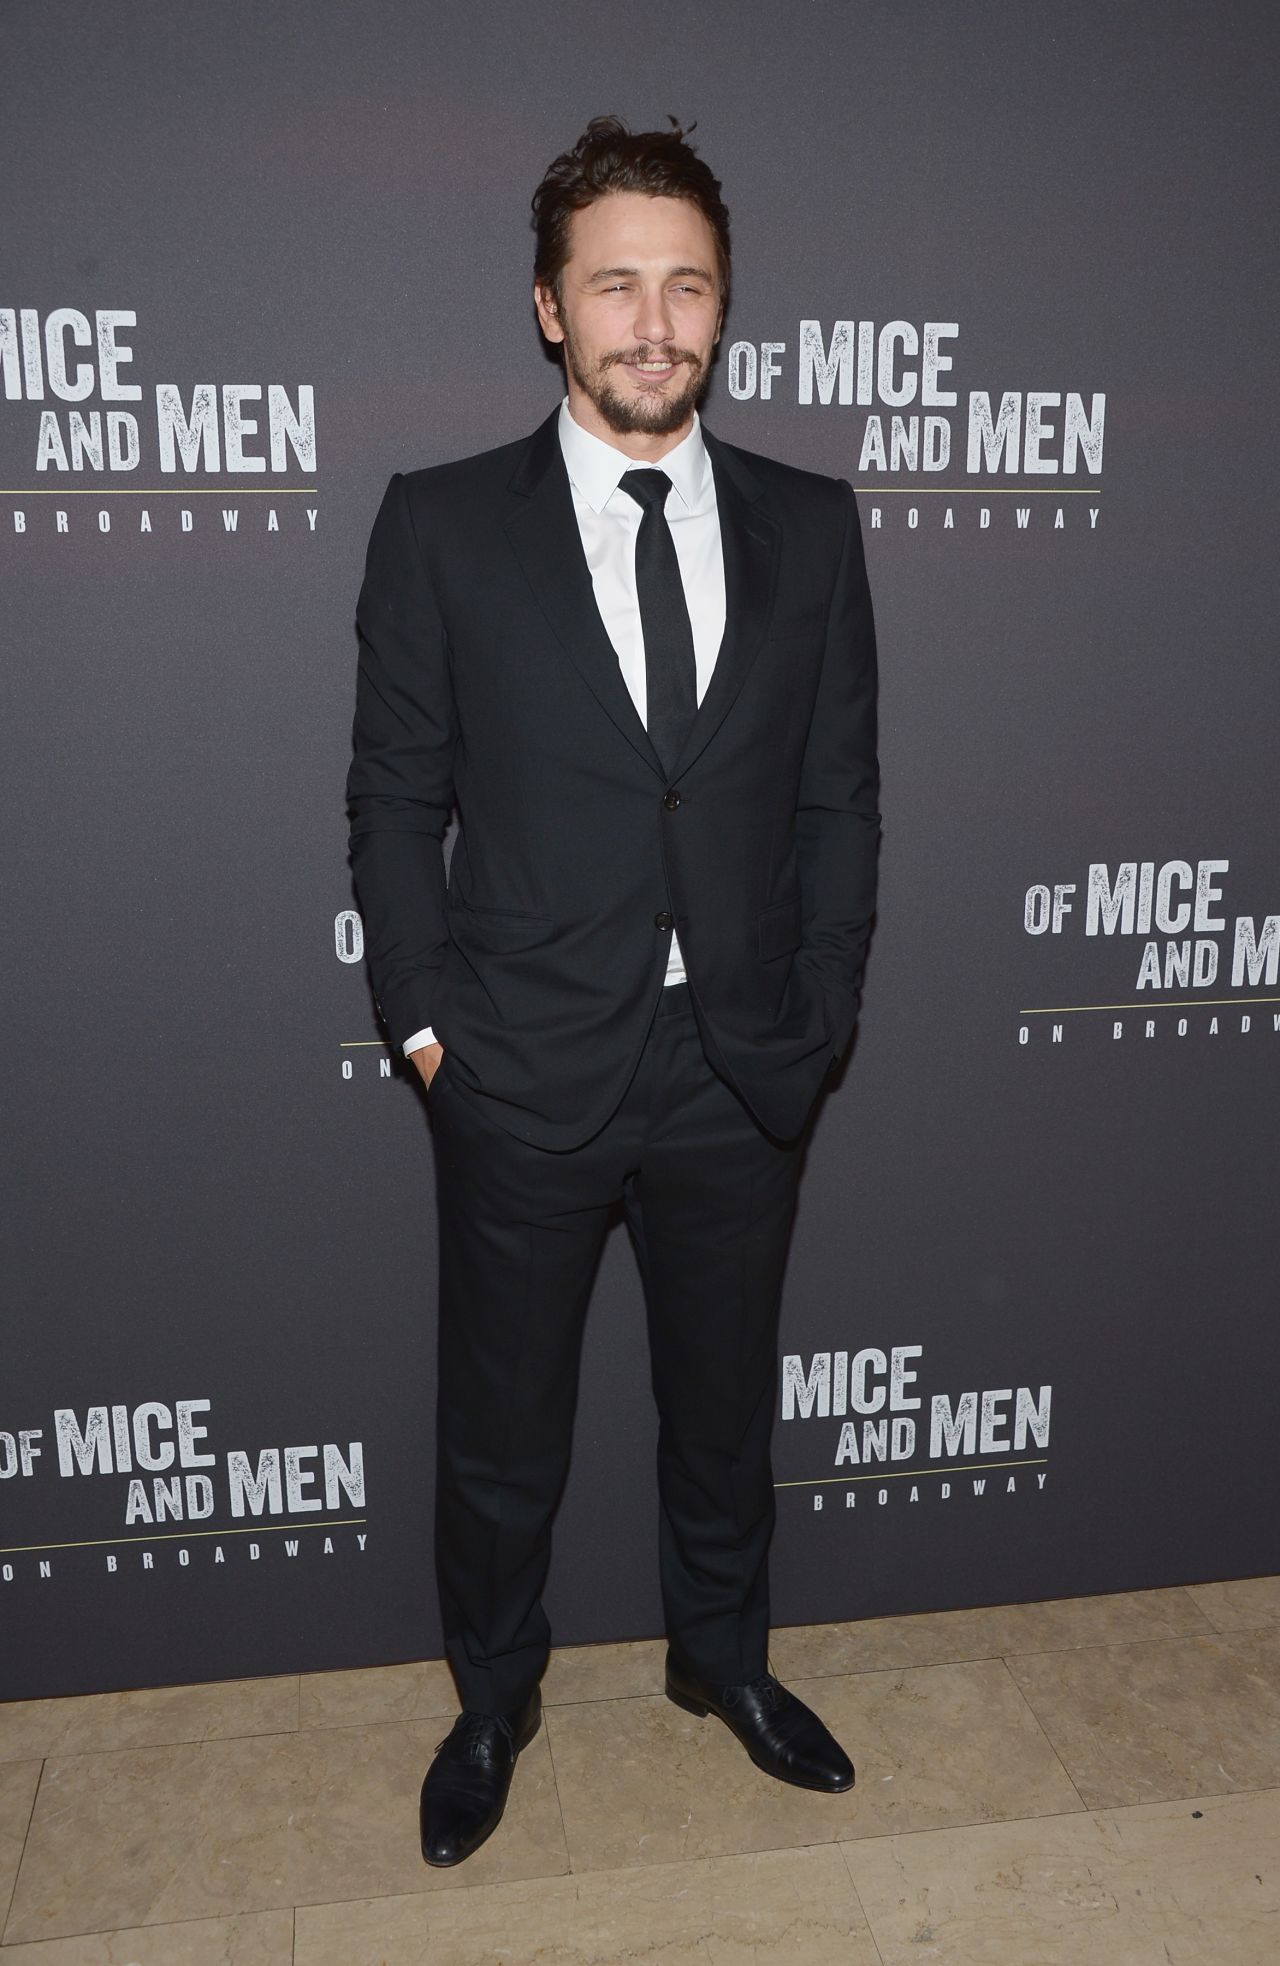 James Franco lashed out at The New York Times and its theater critic, Ben Brantley, over a lukewarm review of the "Of Mice and Men" Broadway revival in which Franco stars. "Brantley is such a little b****," the actor said in an Instagram takedown that he later removed -- but <a href="https://twitter.com/rilaws/status/456785693105065984/photo/1" target="_blank" target="_blank">not before it was screengrabbed for posterity</a>. 